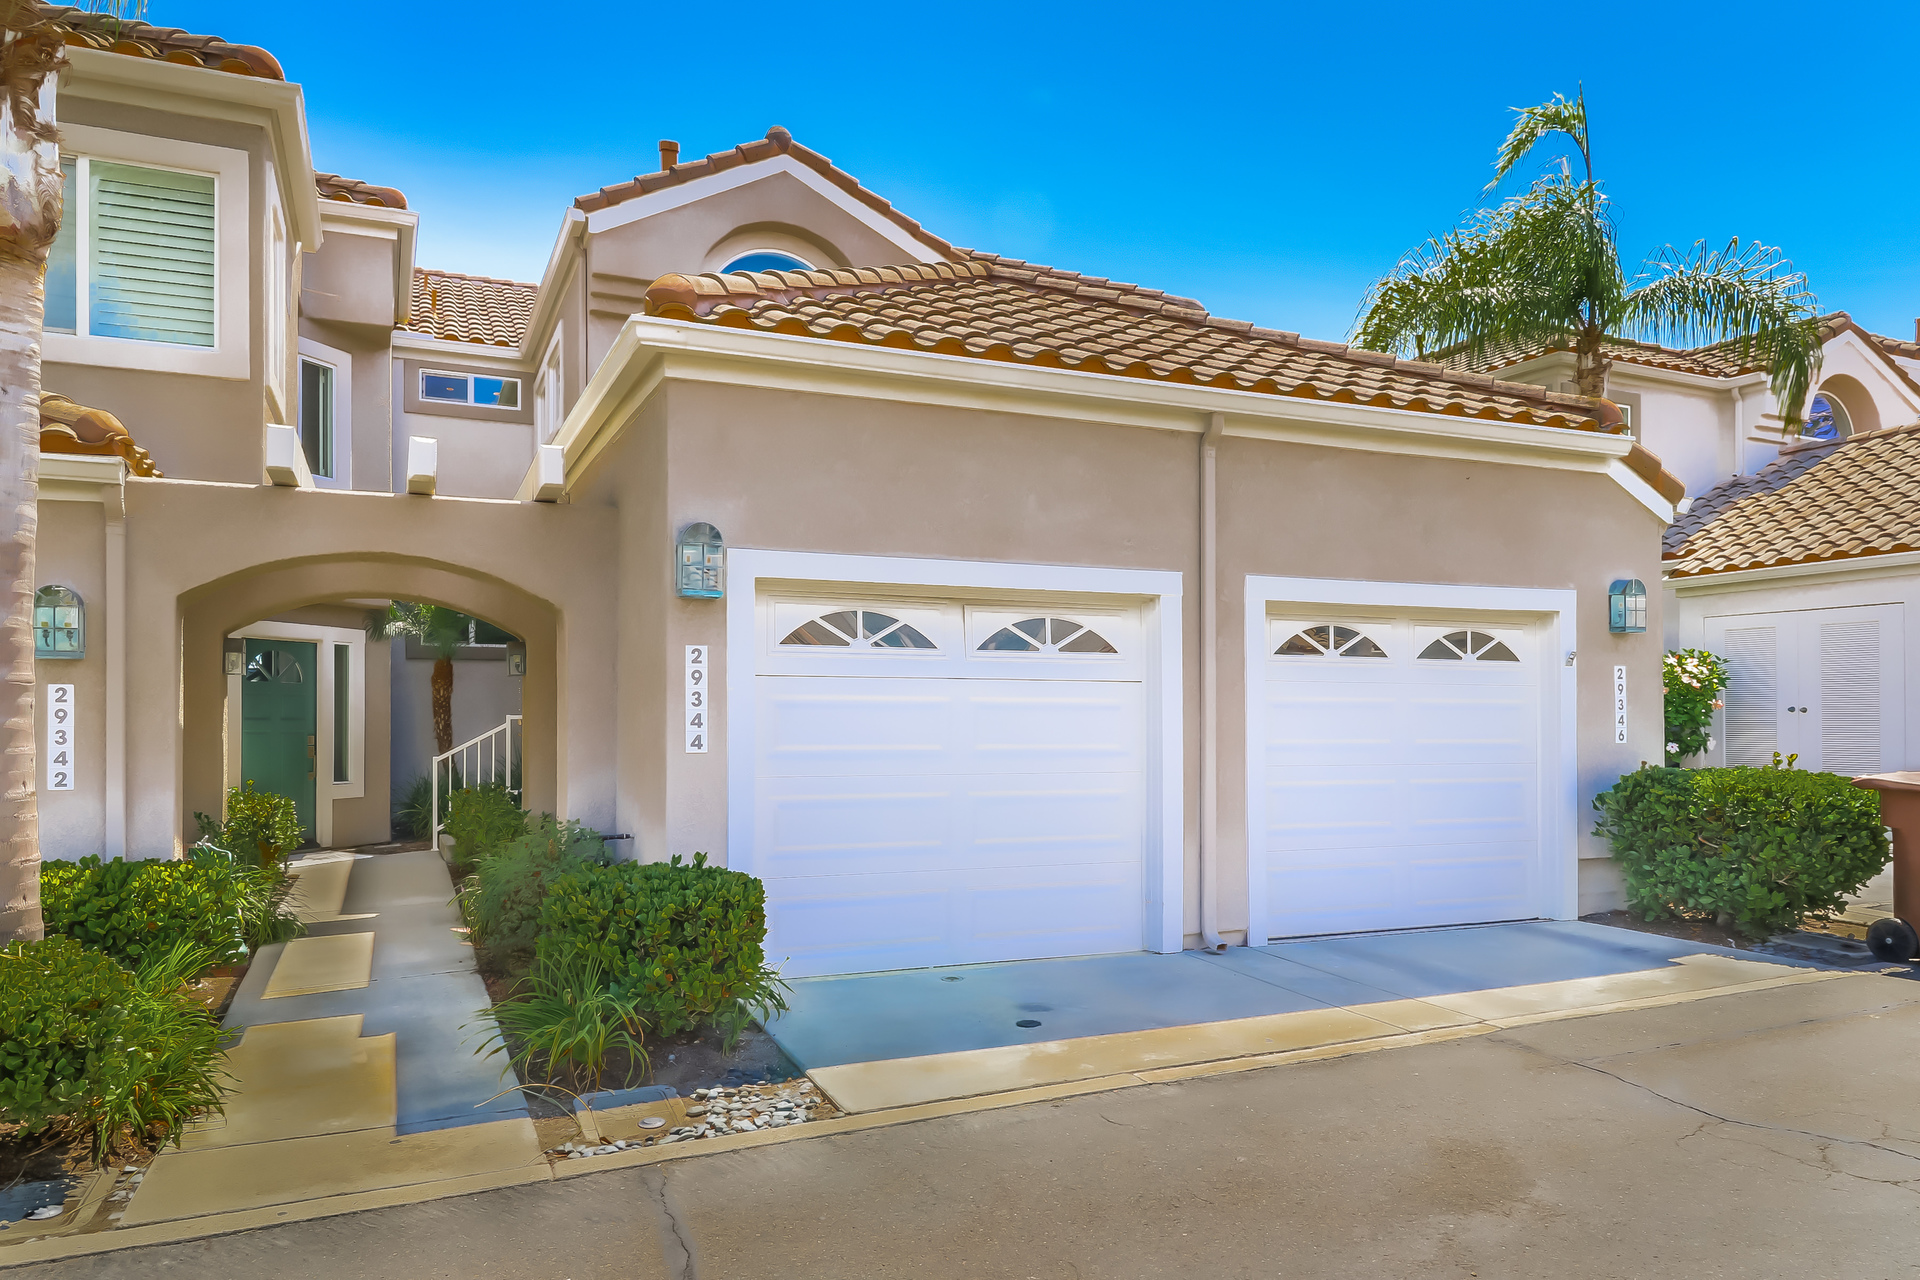 Beautiful Laguna Niguel, CA house showcasing the best property management services